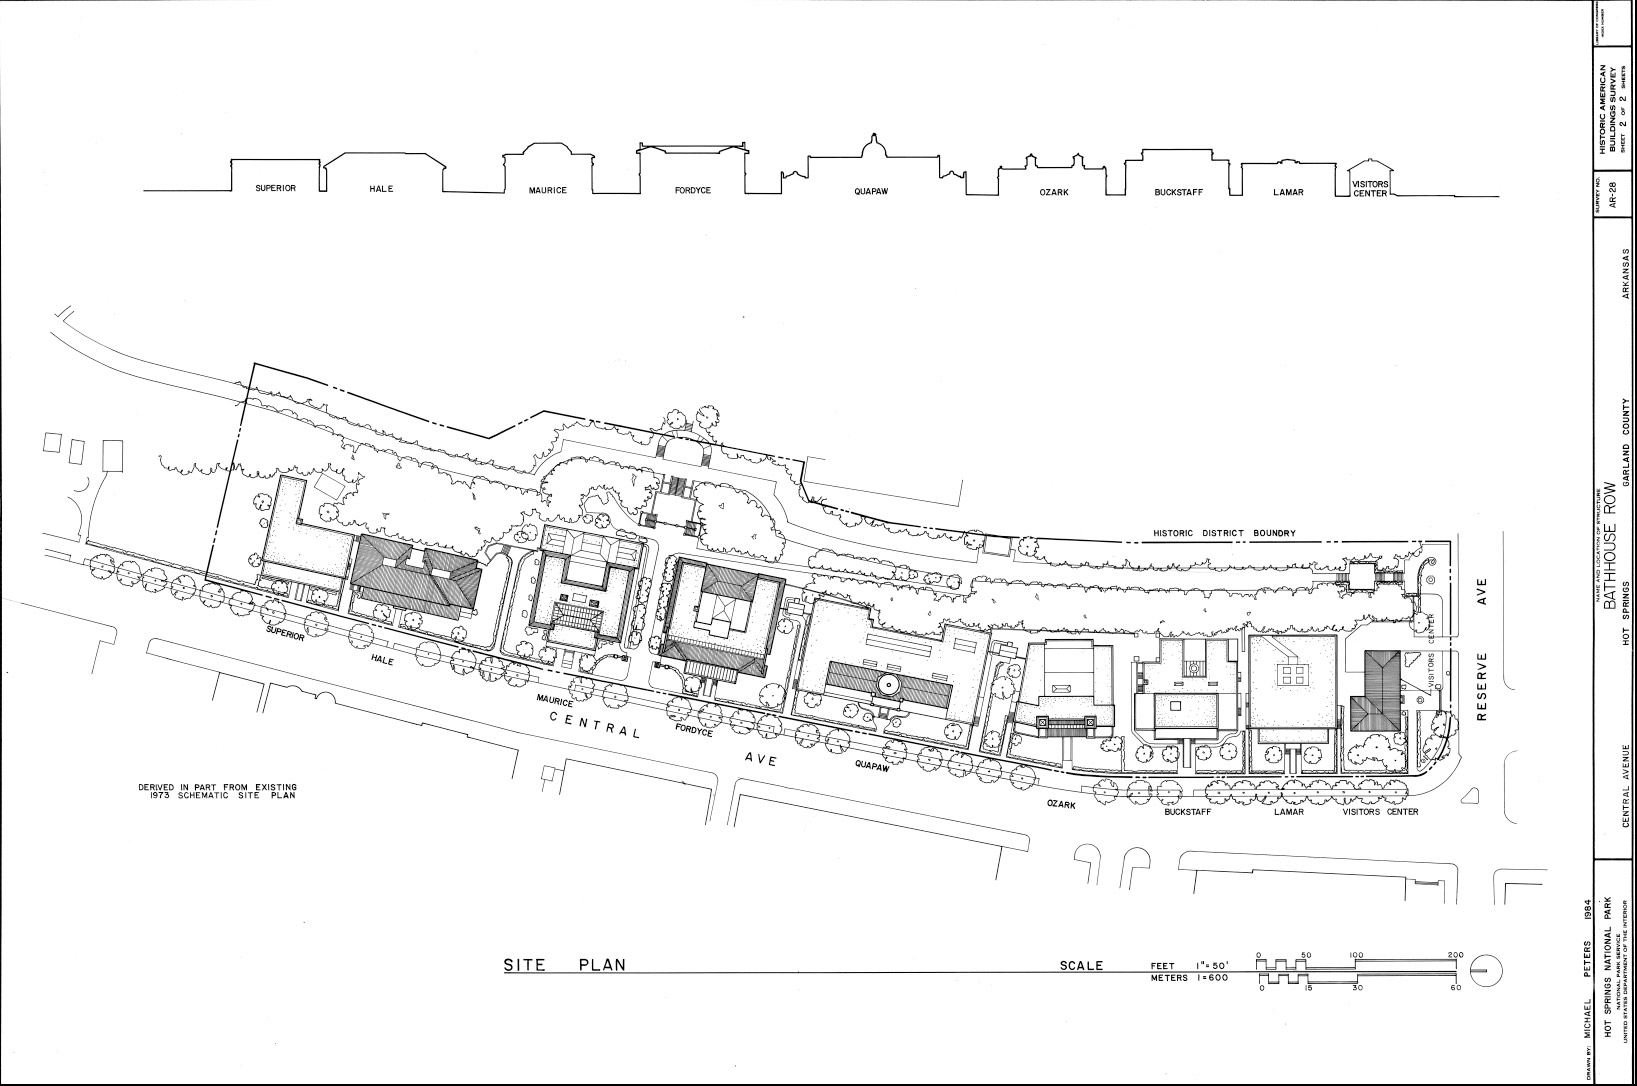 Line drawing of plans for buildings